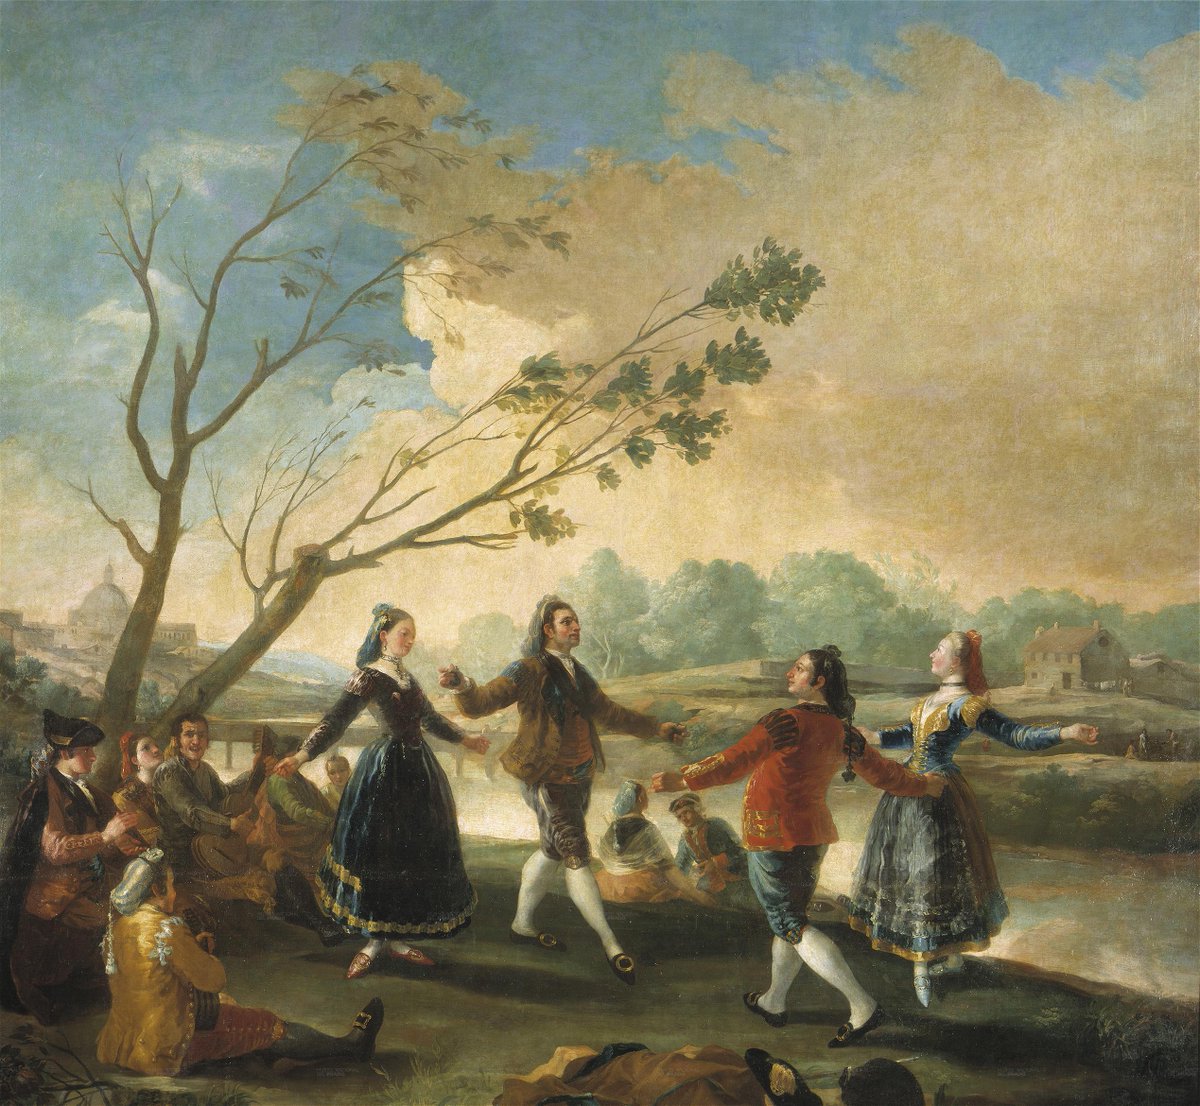 RT @artistgoya: Dance of the Majos at the Banks of Manzanares, 1777 #goya #romanticism https://t.co/vzzCDD8O5y